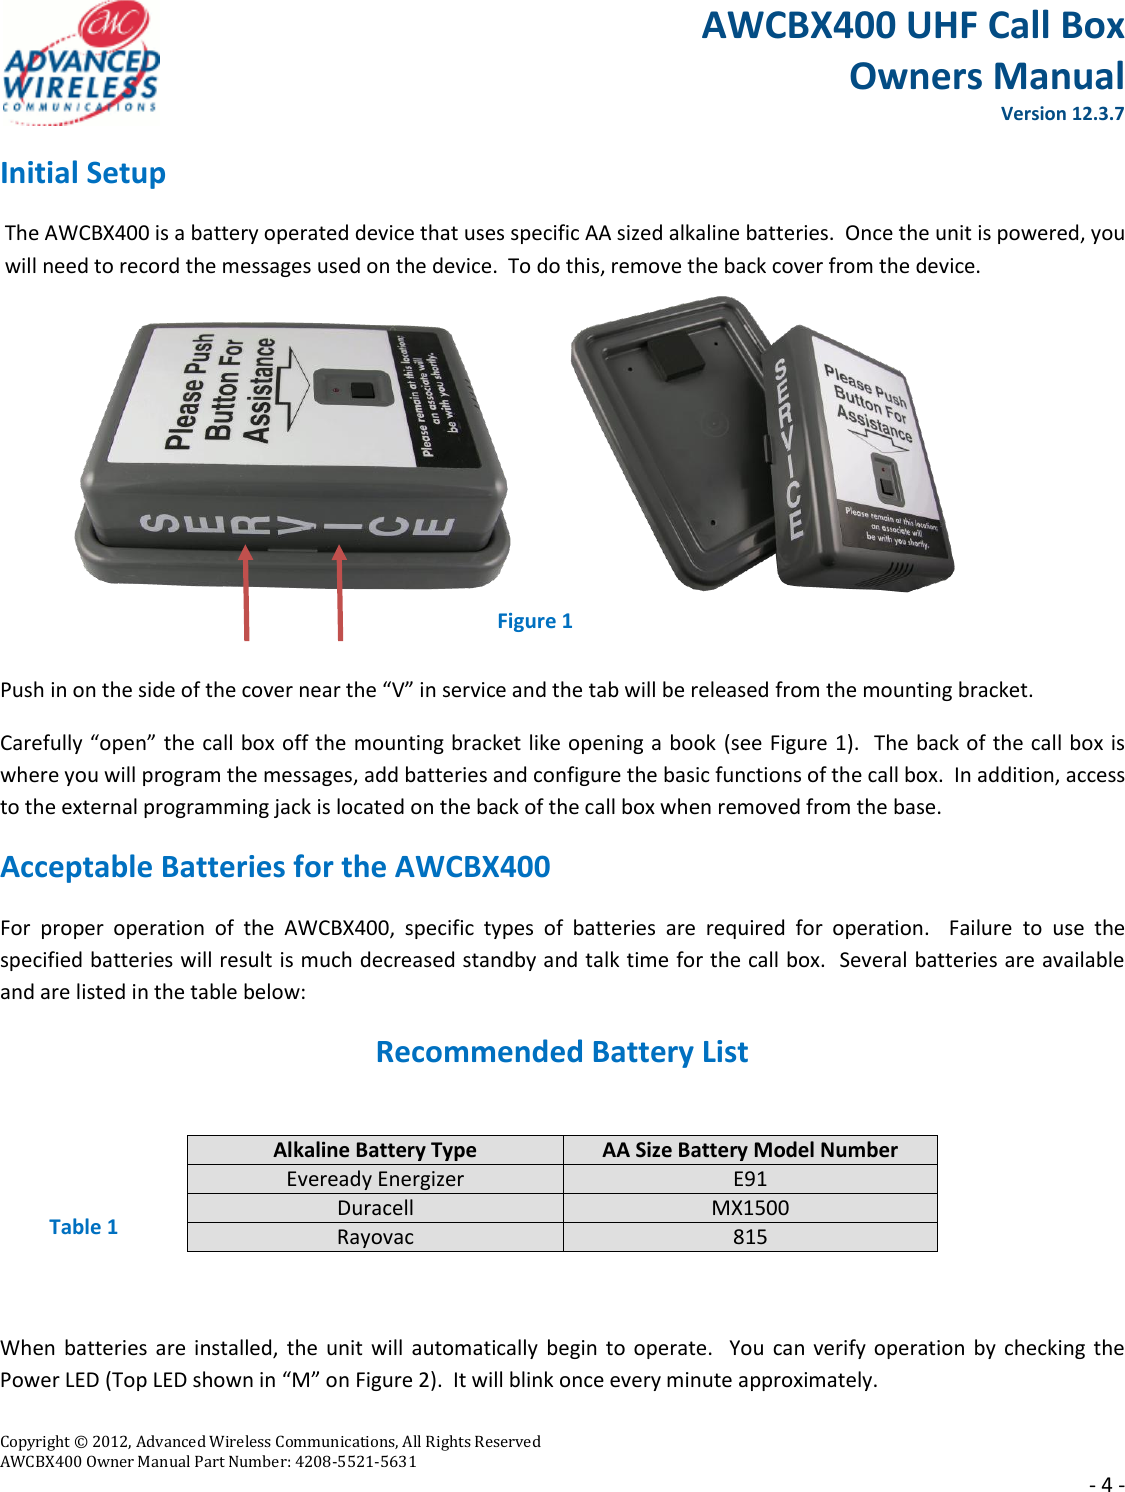 AWCBX400 UHF Call Box Owners Manual  Version 12.3.7   Copyright © 2012, Advanced Wireless Communications, All Rights Reserved  AWCBX400 Owner Manual Part Number: 4208-5521-5631     - 4 - Initial Setup The AWCBX400 is a battery operated device that uses specific AA sized alkaline batteries.  Once the unit is powered, you will need to record the messages used on the device.  To do this, remove the back cover from the device.         Push in on the side of the cover near the “V” in service and the tab will be released from the mounting bracket. Carefully “open” the call box off the mounting bracket like opening a book (see Figure 1).  The back of the call box is where you will program the messages, add batteries and configure the basic functions of the call box.  In addition, access to the external programming jack is located on the back of the call box when removed from the base. Acceptable Batteries for the AWCBX400 For  proper  operation  of  the  AWCBX400,  specific  types  of  batteries  are  required  for  operation.    Failure  to  use  the specified batteries will result is much decreased standby and talk time for the call box.  Several batteries are available and are listed in the table below:  Recommended Battery List     Table 1  When batteries are  installed,  the  unit  will  automatically  begin  to  operate.   You can verify operation by checking  the Power LED (Top LED shown in “M” on Figure 2).  It will blink once every minute approximately. Alkaline Battery Type AA Size Battery Model Number Eveready Energizer E91 Duracell MX1500 Rayovac 815 Figure 1 